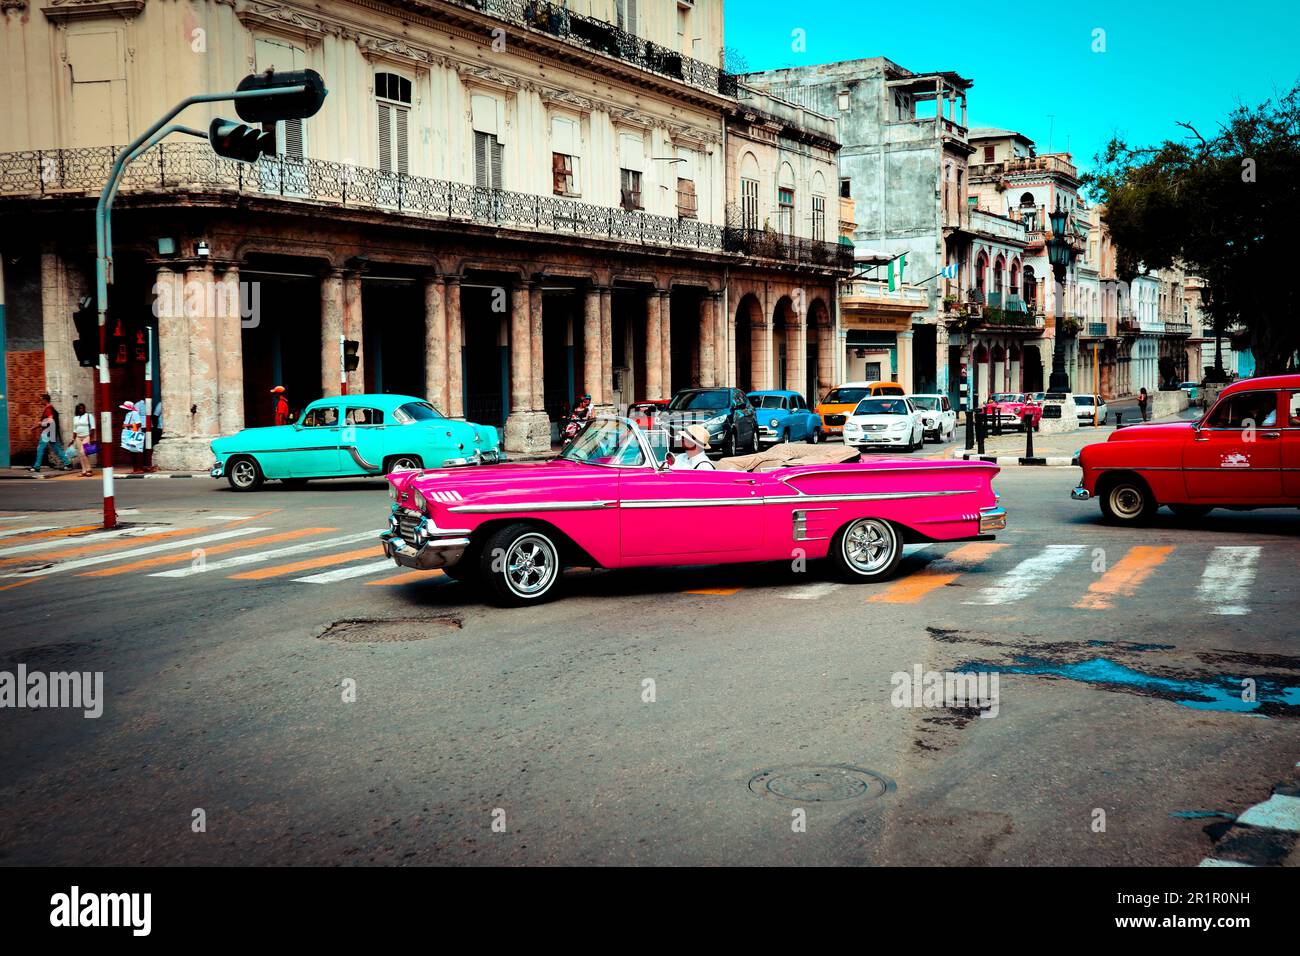 Drive a classic car through Havana for an unforgettable journey into the city's charm and history. Stock Photo